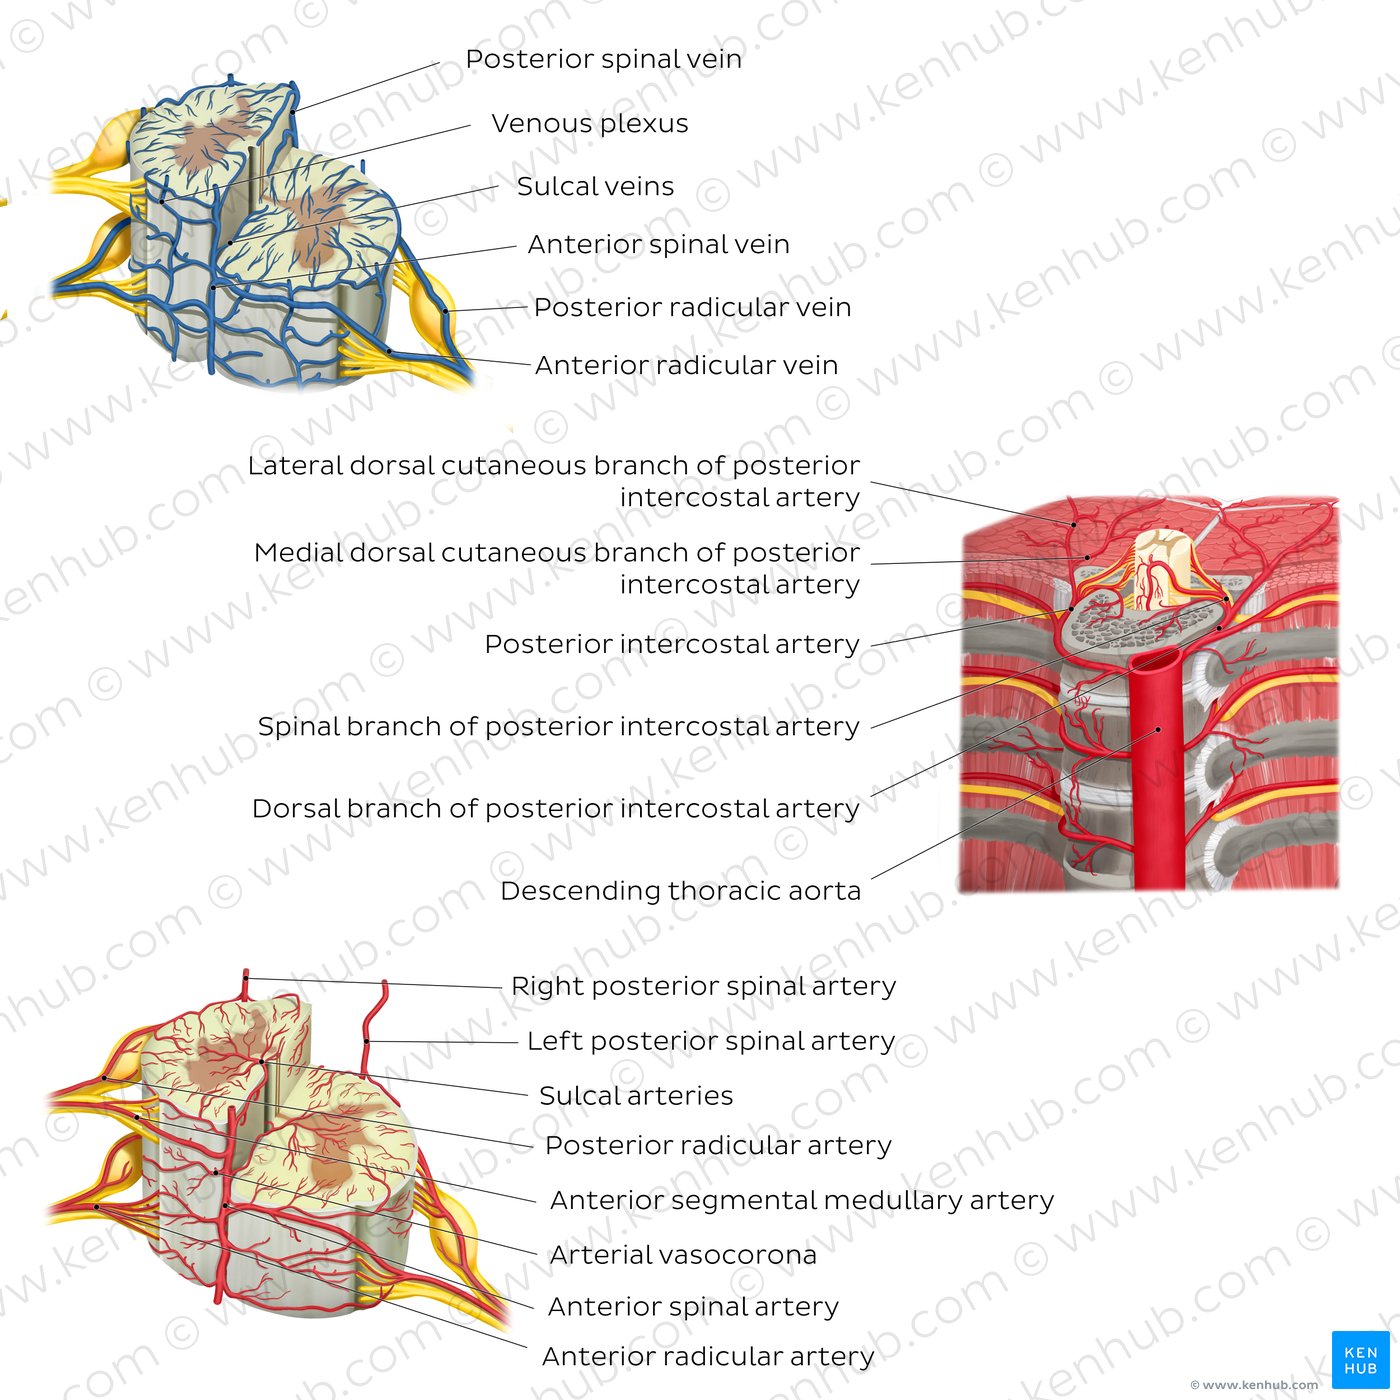 Blood vessels of the spinal cord: Overview